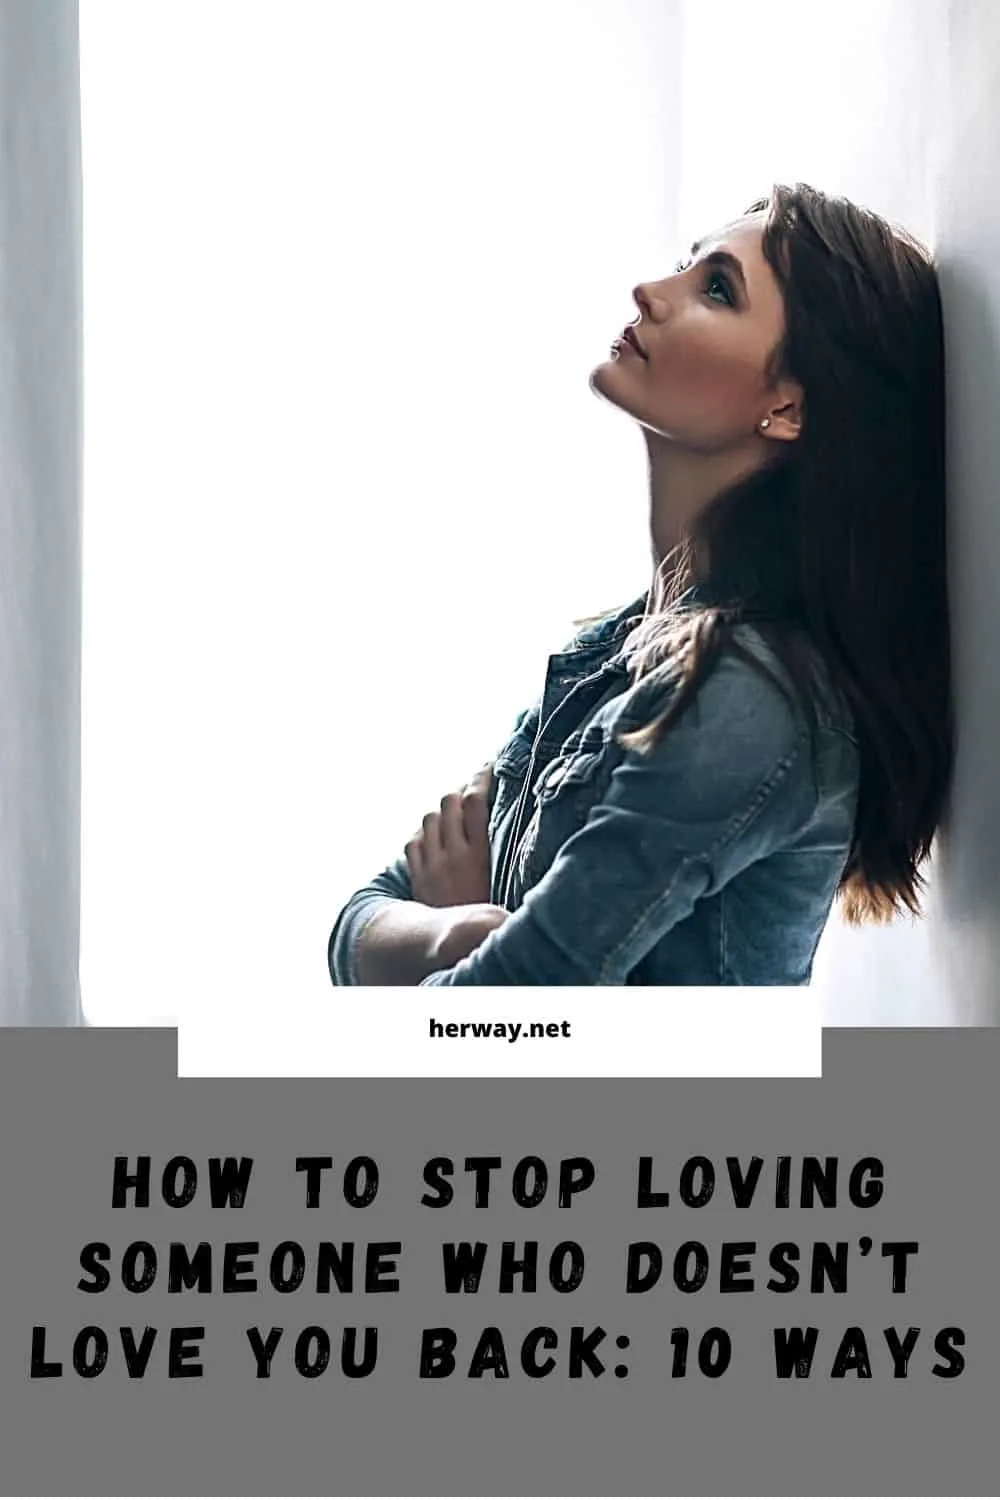 How To Stop Loving Someone Who Doesn’t Love You Back 10 Ways